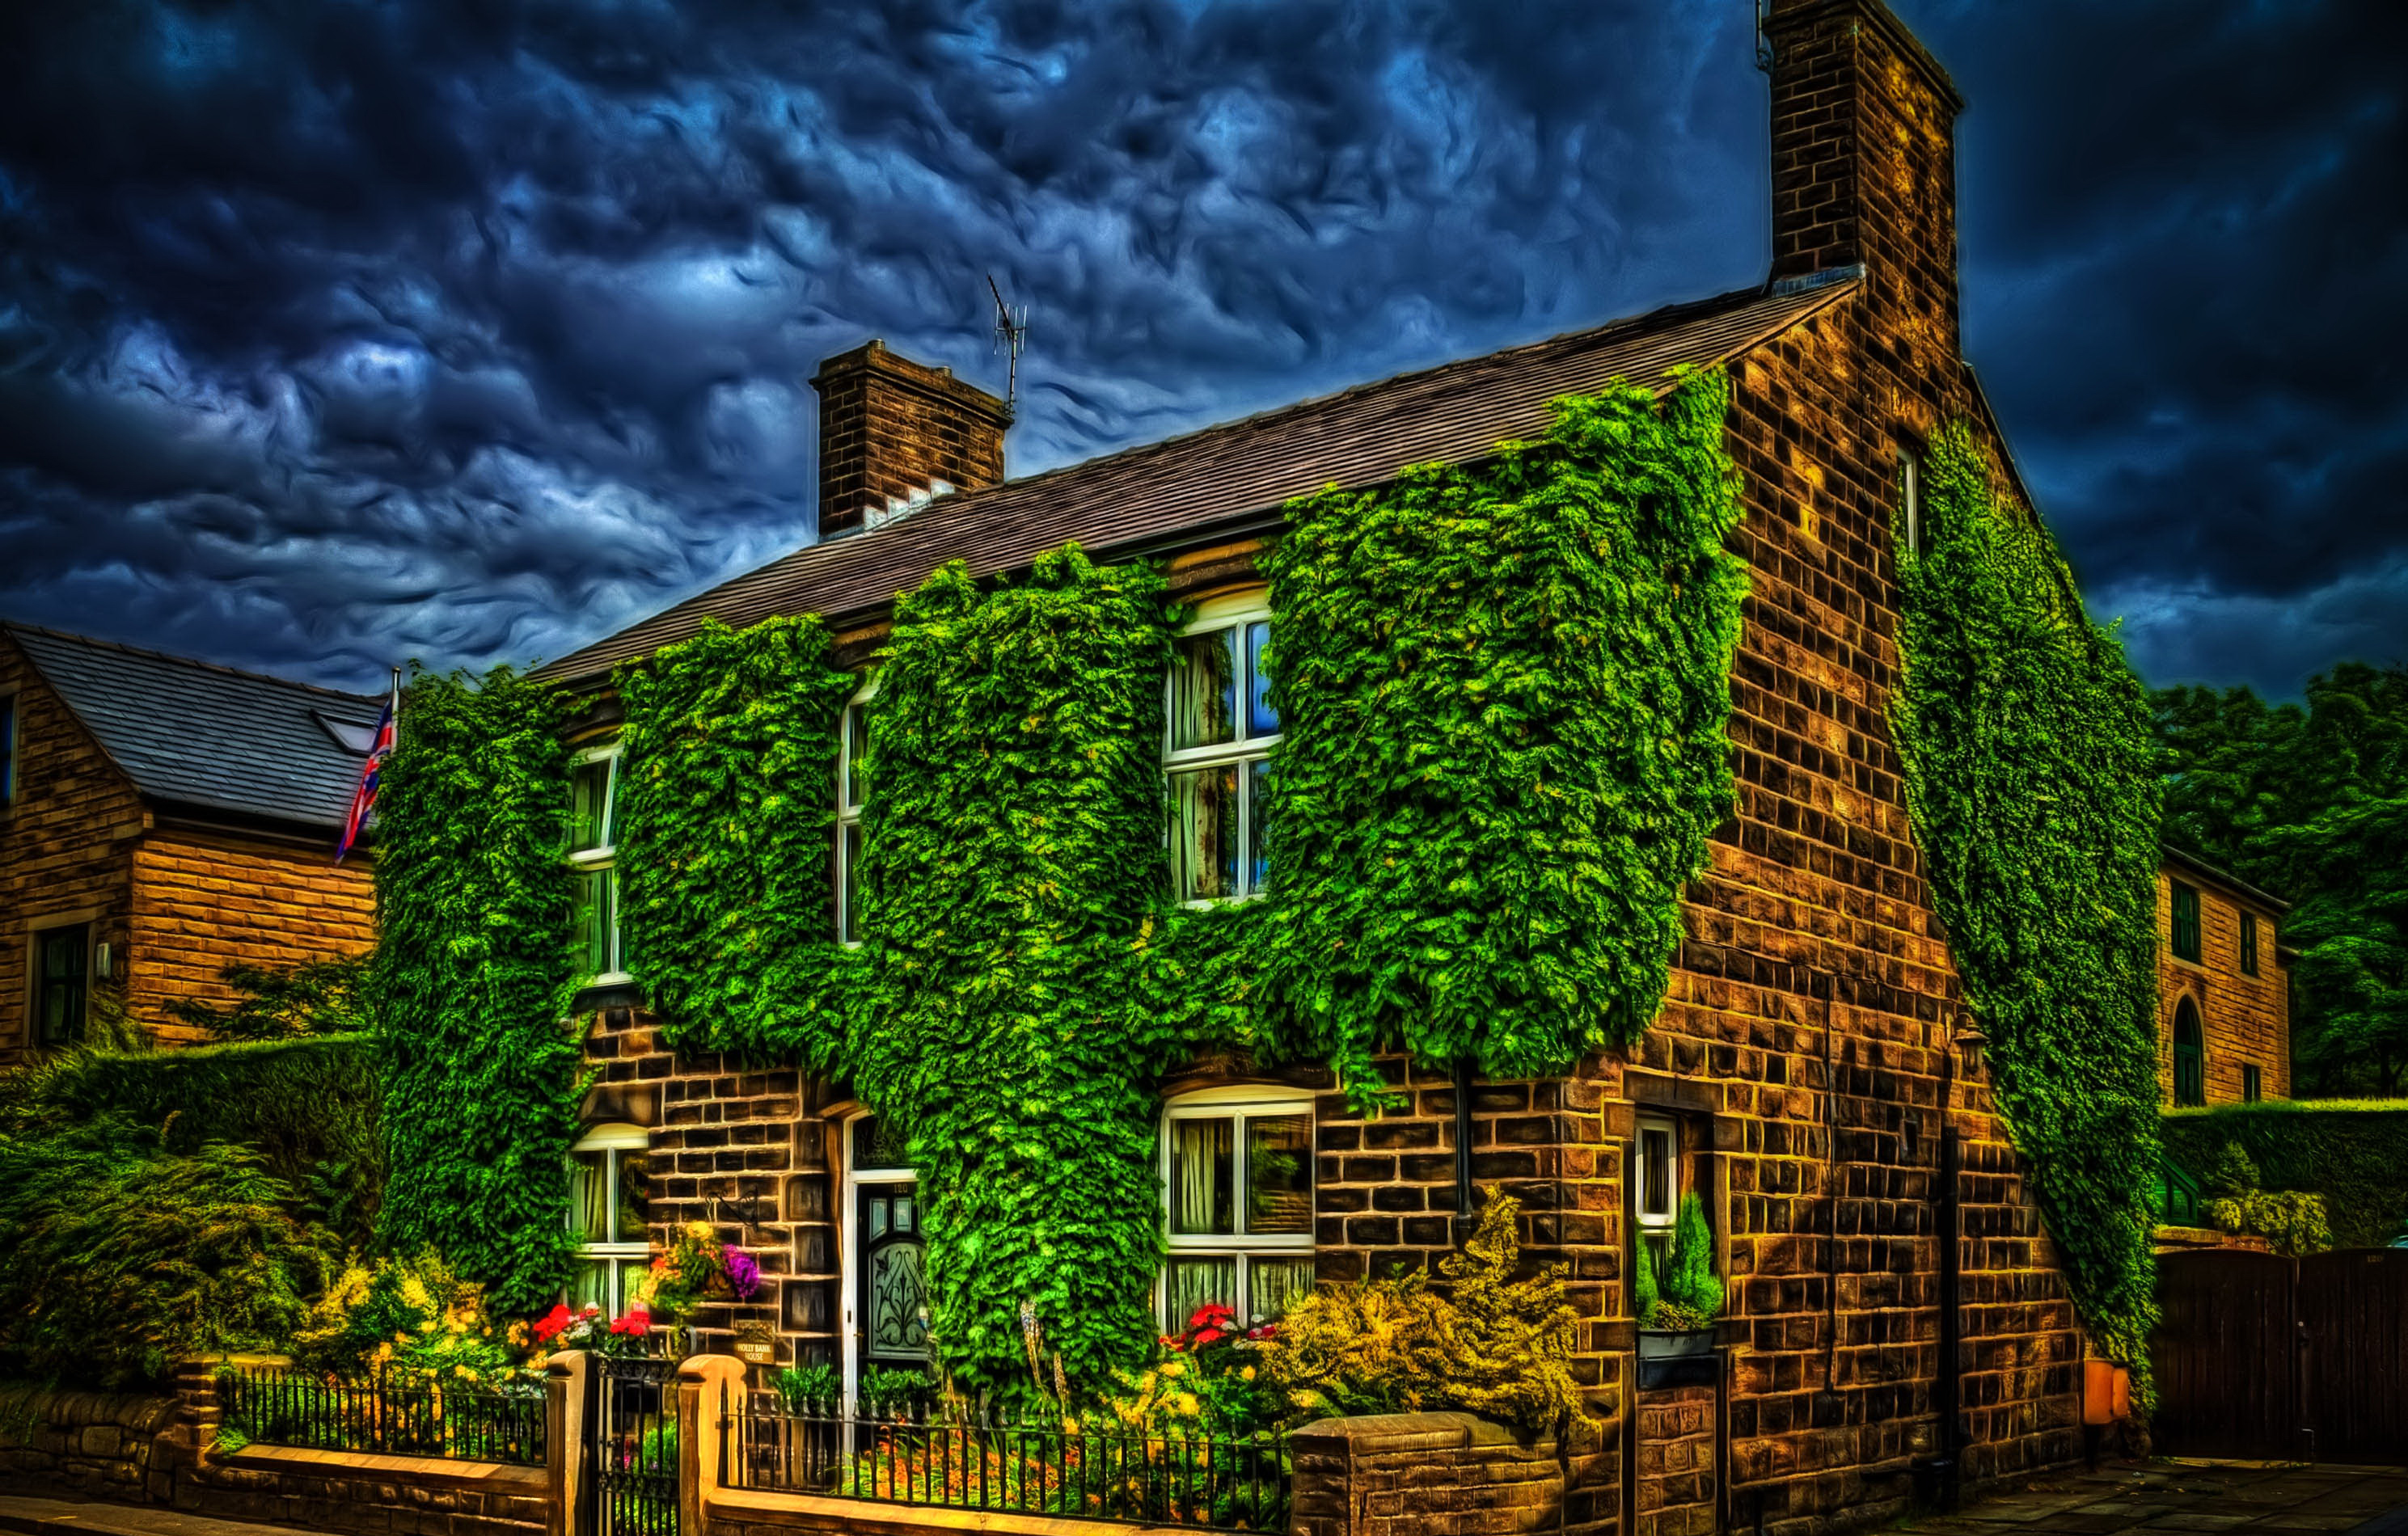 Free HD green, england, brick, photography, hdr, architecture, house, leaf, vine